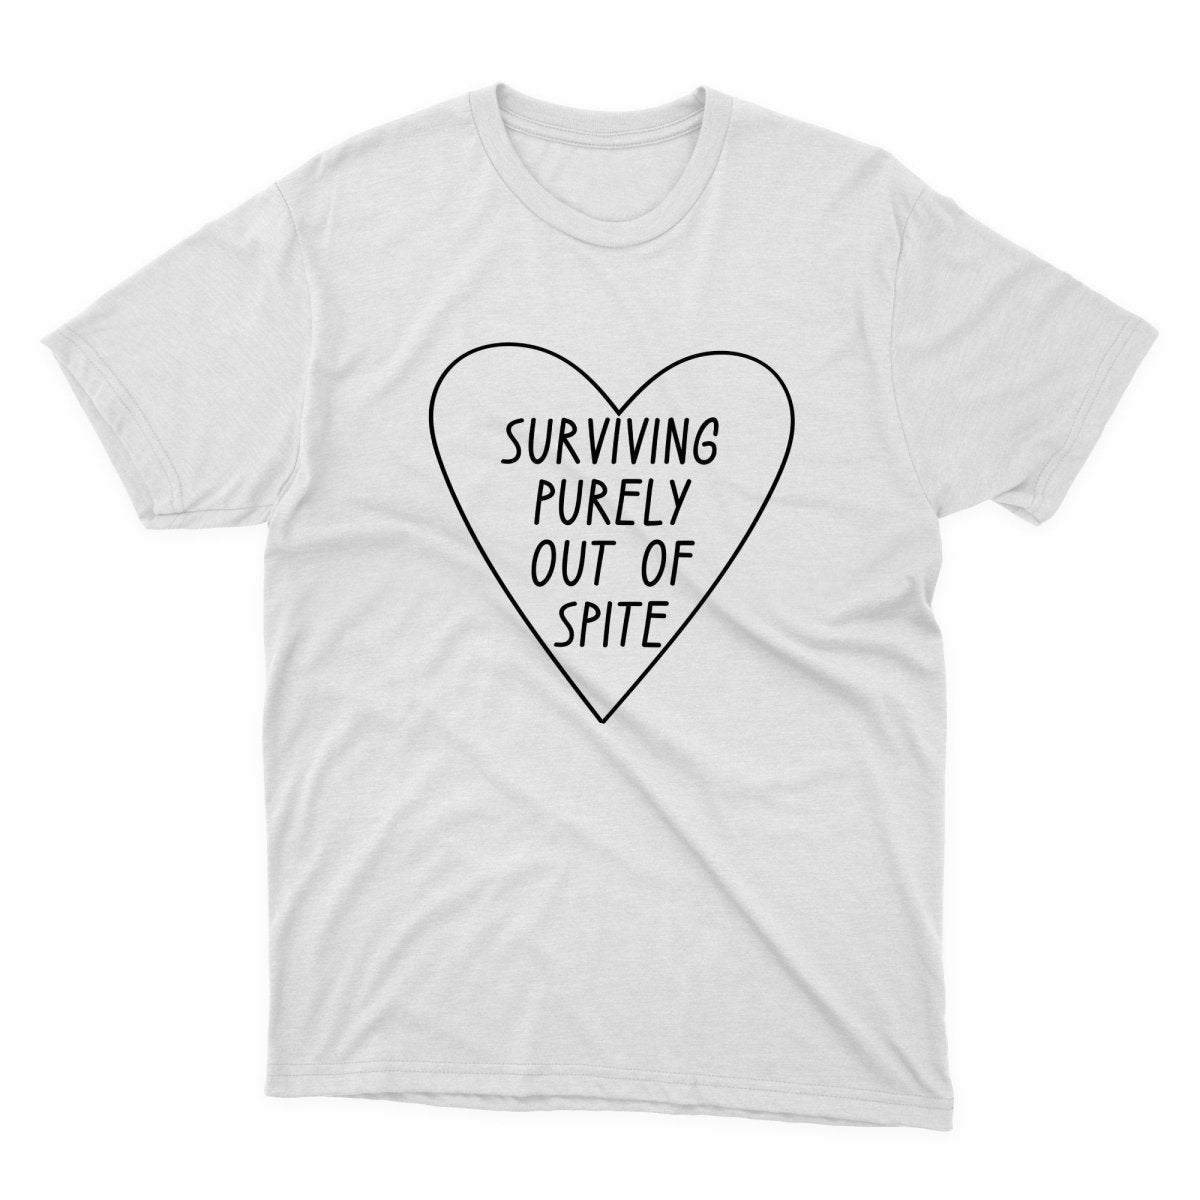 Surviving Purely Out Of Spite Shirt - stickerbullSurviving Purely Out Of Spite ShirtShirtsPrintifystickerbull24766656991538604938WhiteSa white t - shirt with the words surviving purely out of spite on it